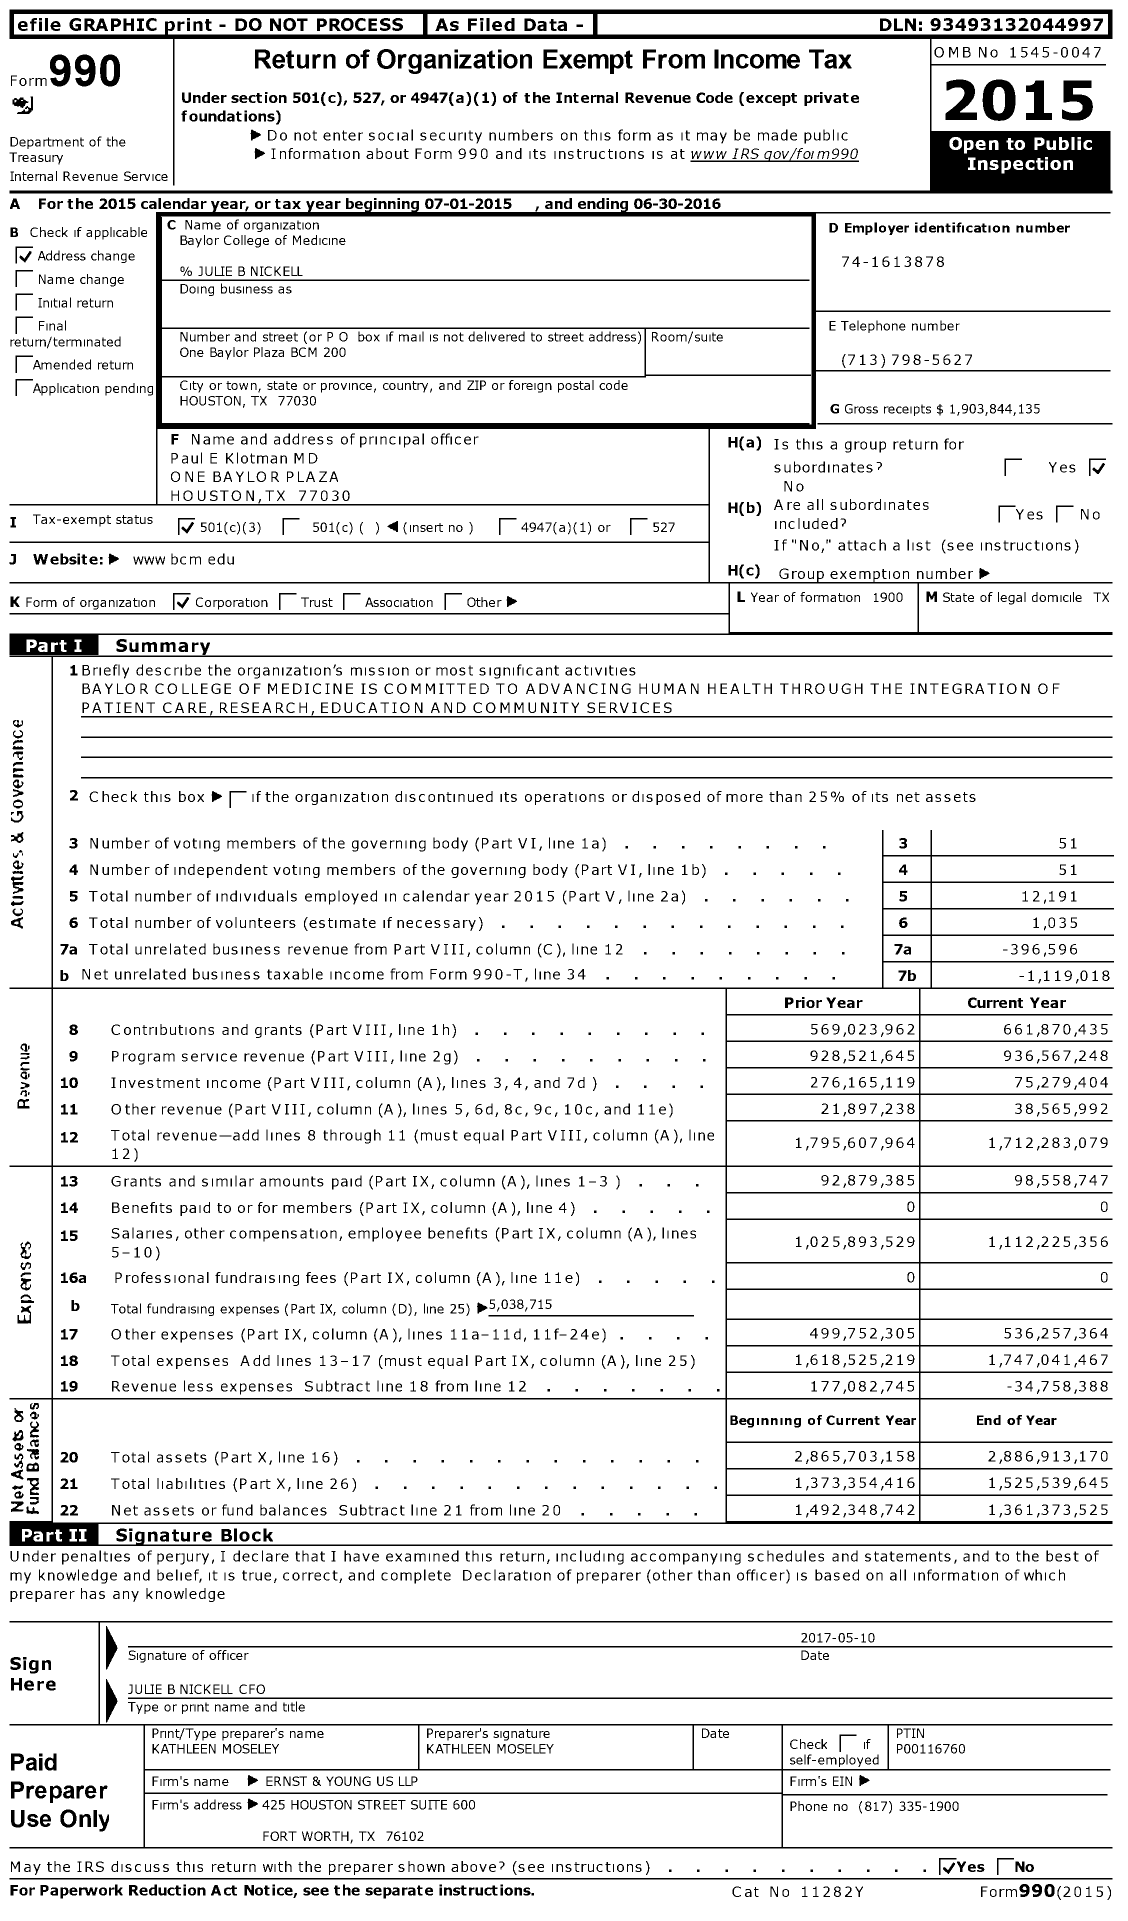 Image of first page of 2015 Form 990 for Baylor College of Medicine (BCM)